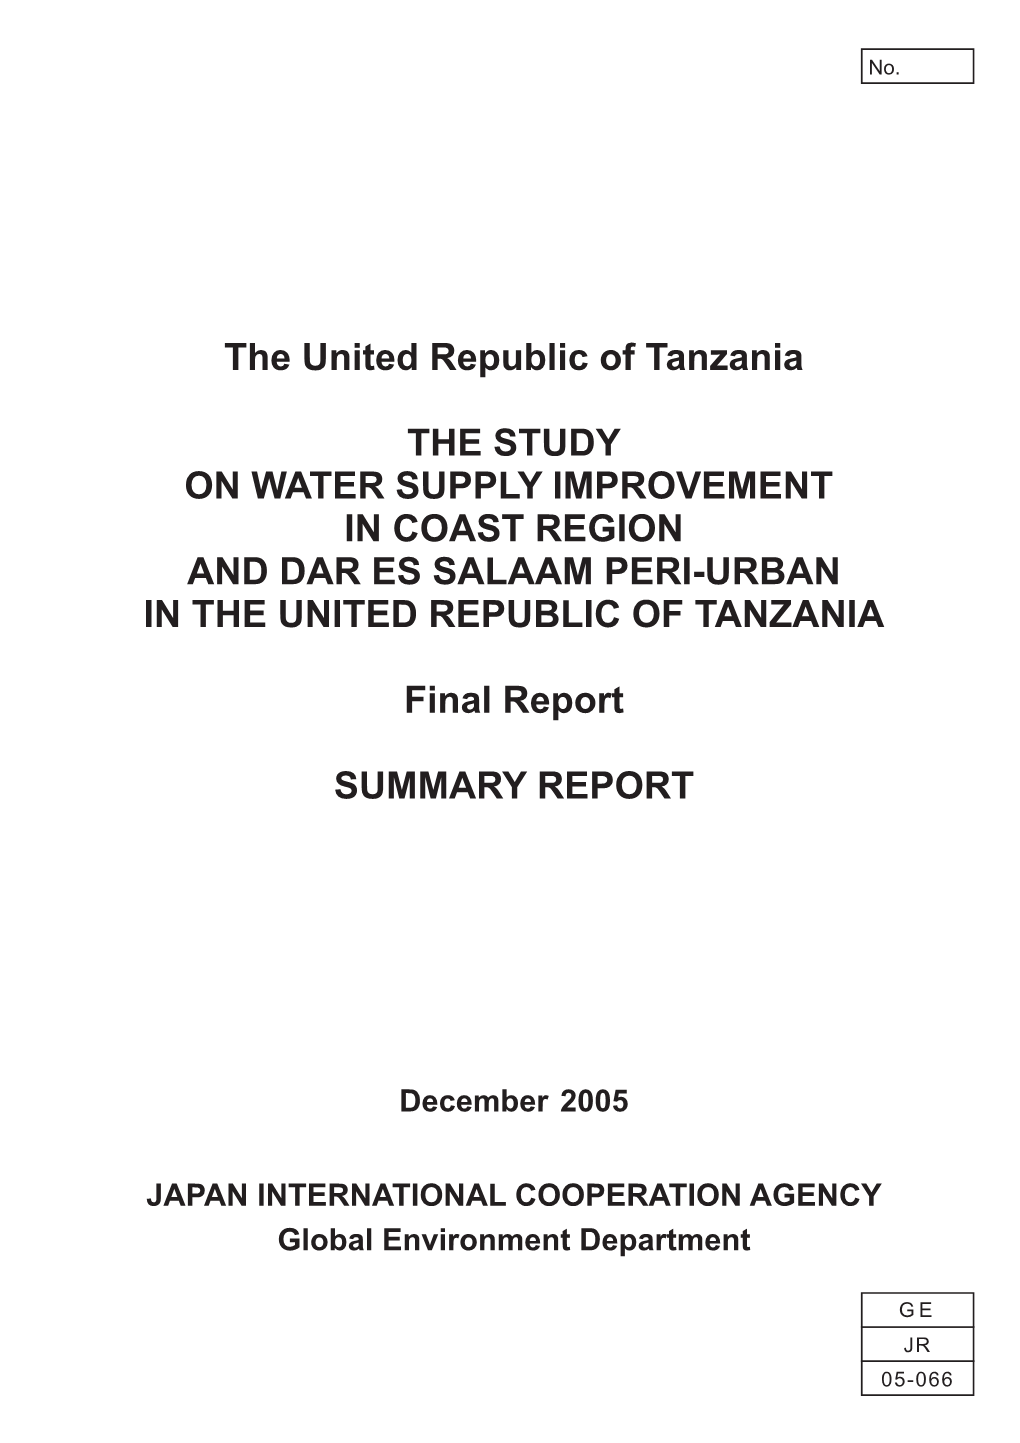 The United Republic of Tanzania the STUDY on WATER SUPPLY